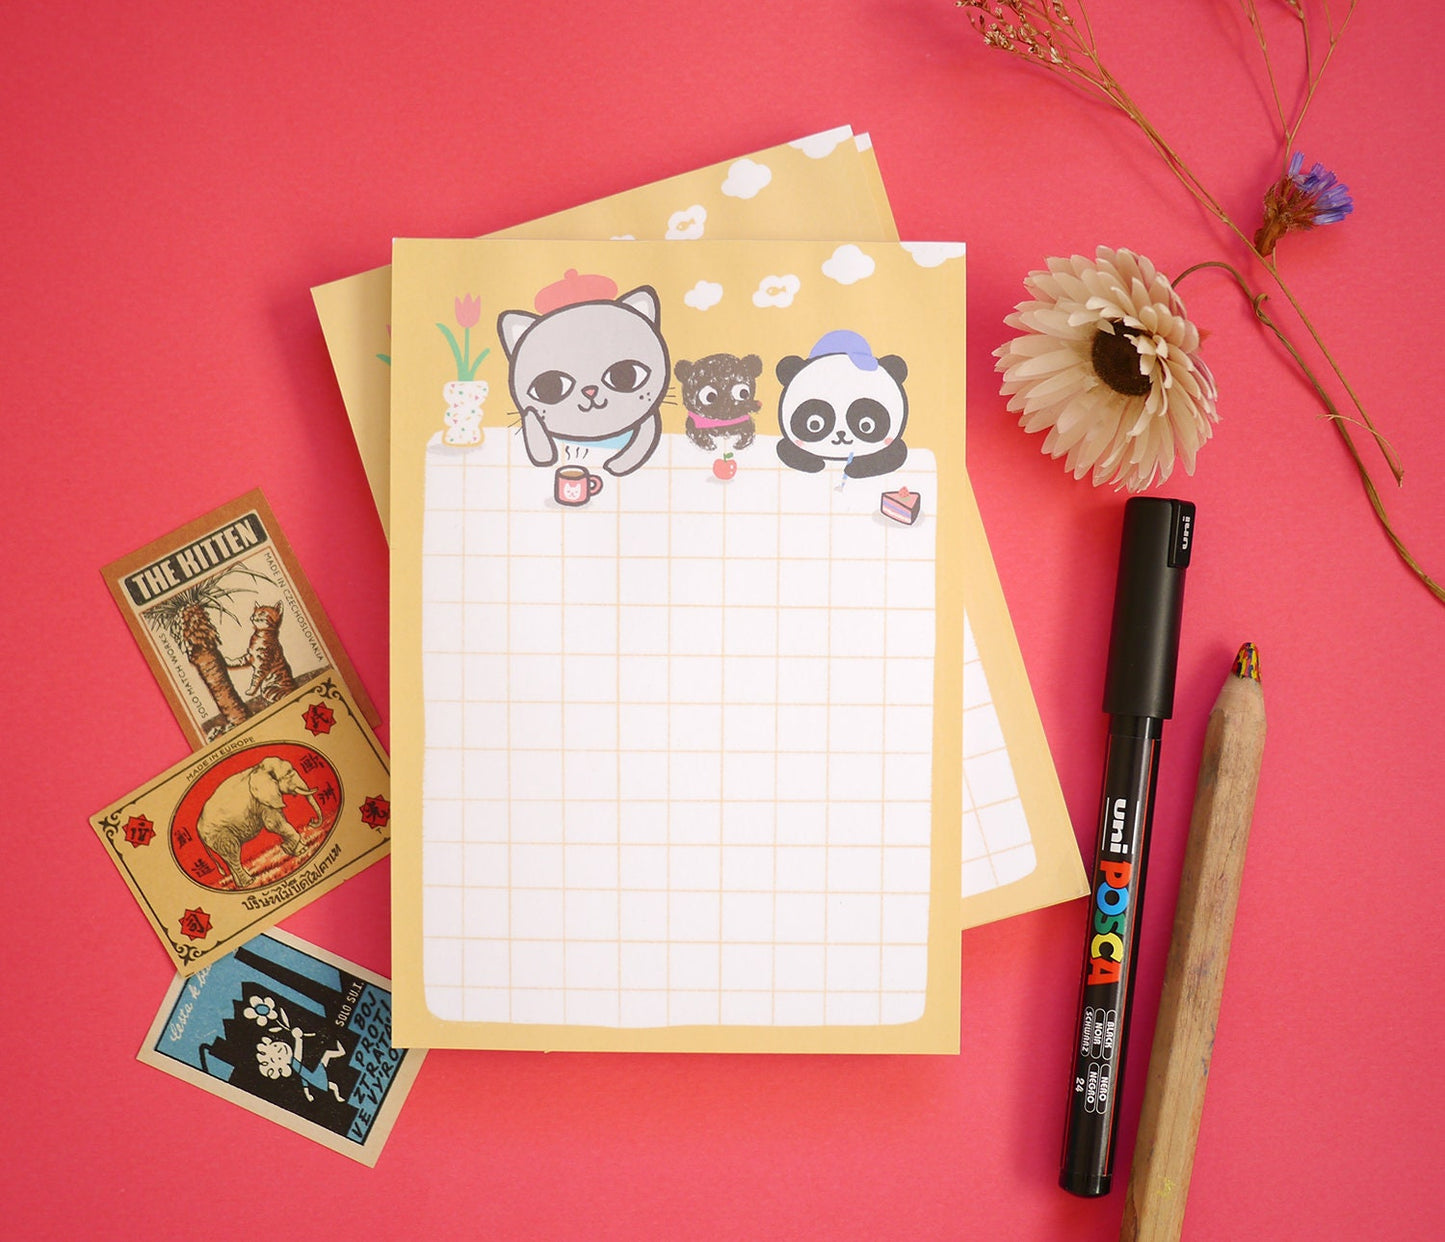 Afternoon day dreaming Notepad - A6 List pad, tear away notepad, Cute Illustration notepad